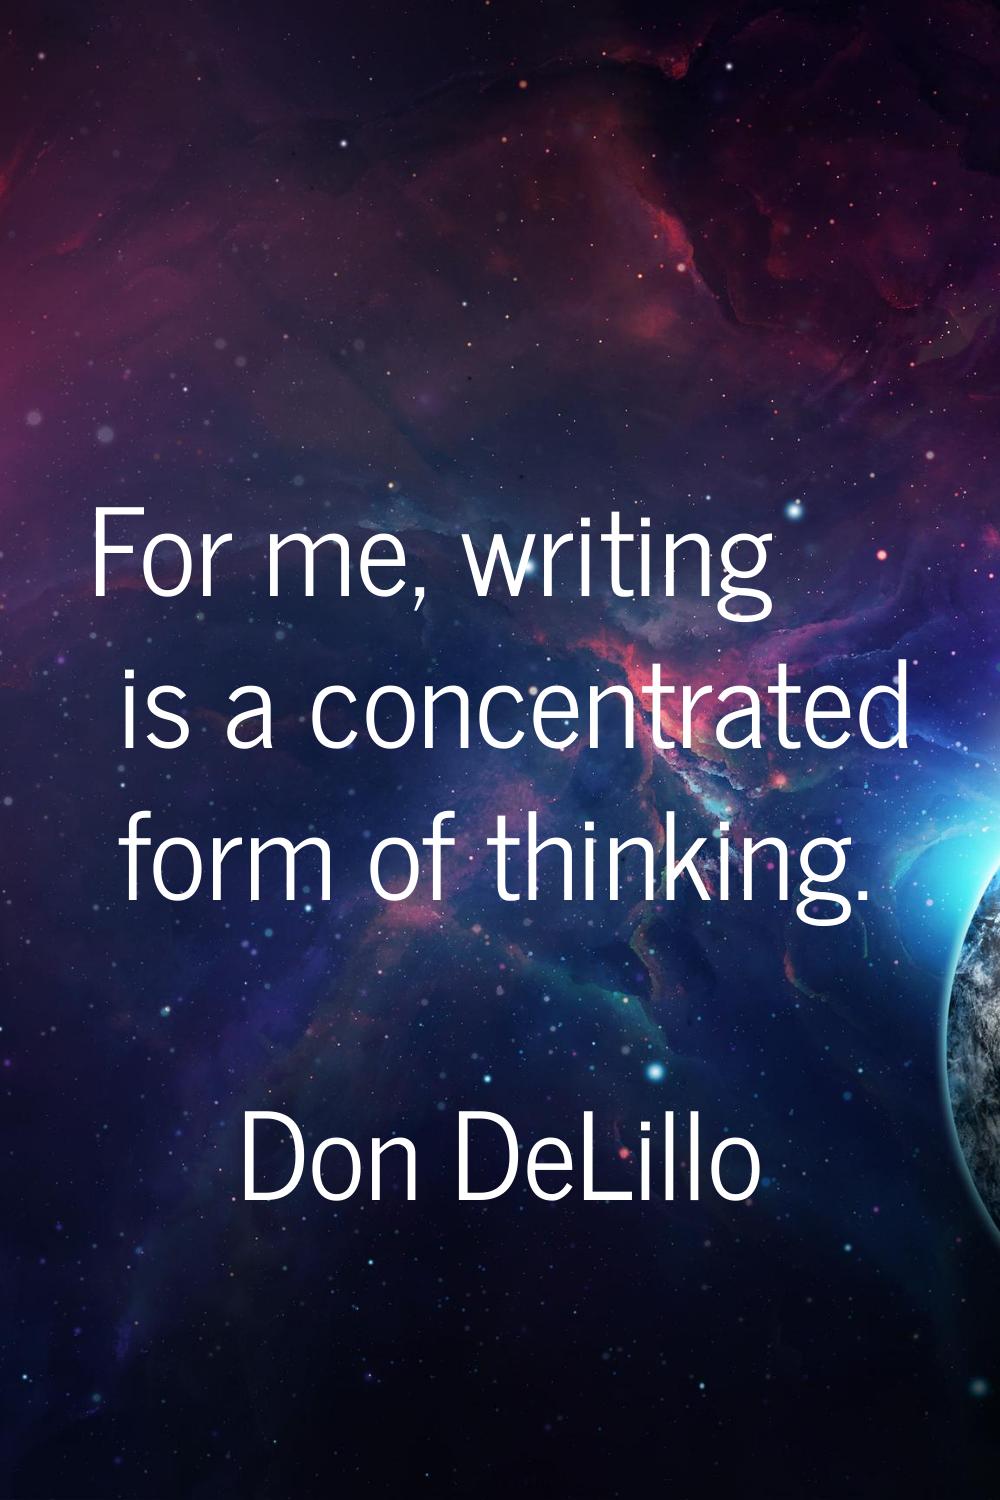 For me, writing is a concentrated form of thinking.